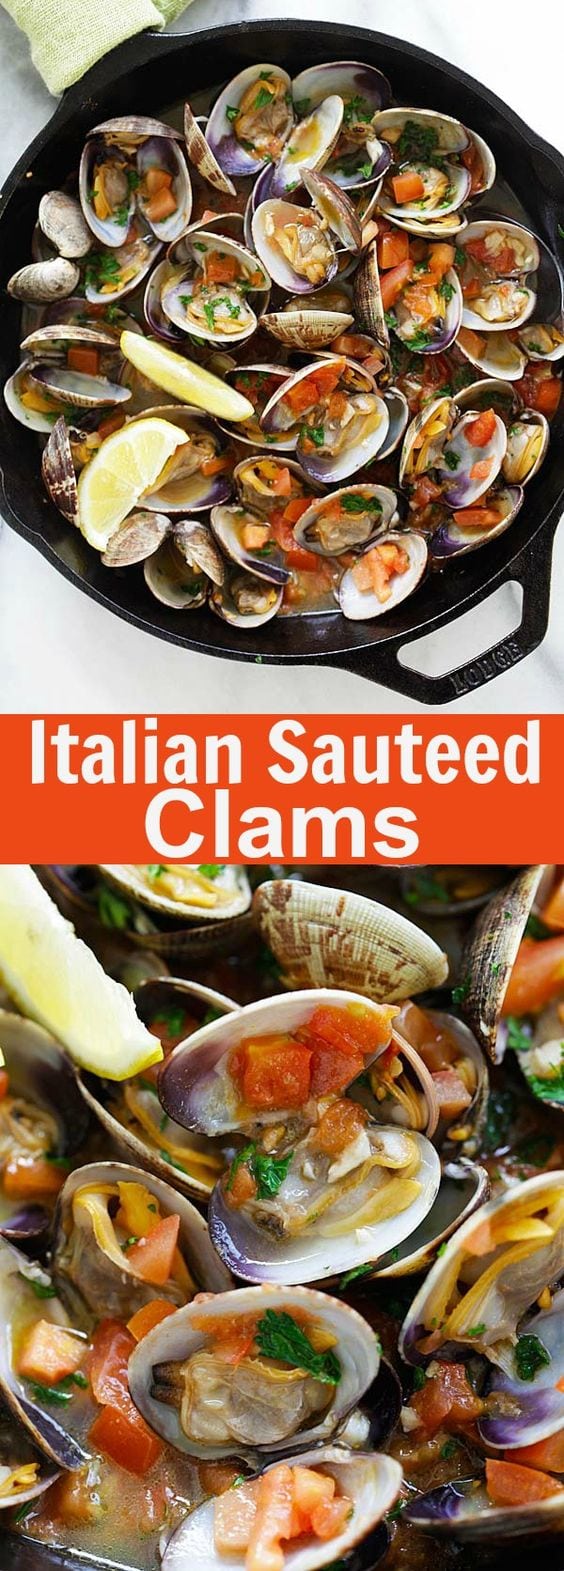 Italian Sauteed Clams – Skillet sauteed clams with garlic, tomatoes, white wine and parsley. This recipe tastes just like restaurants straight from Italy | rasamalaysia.com